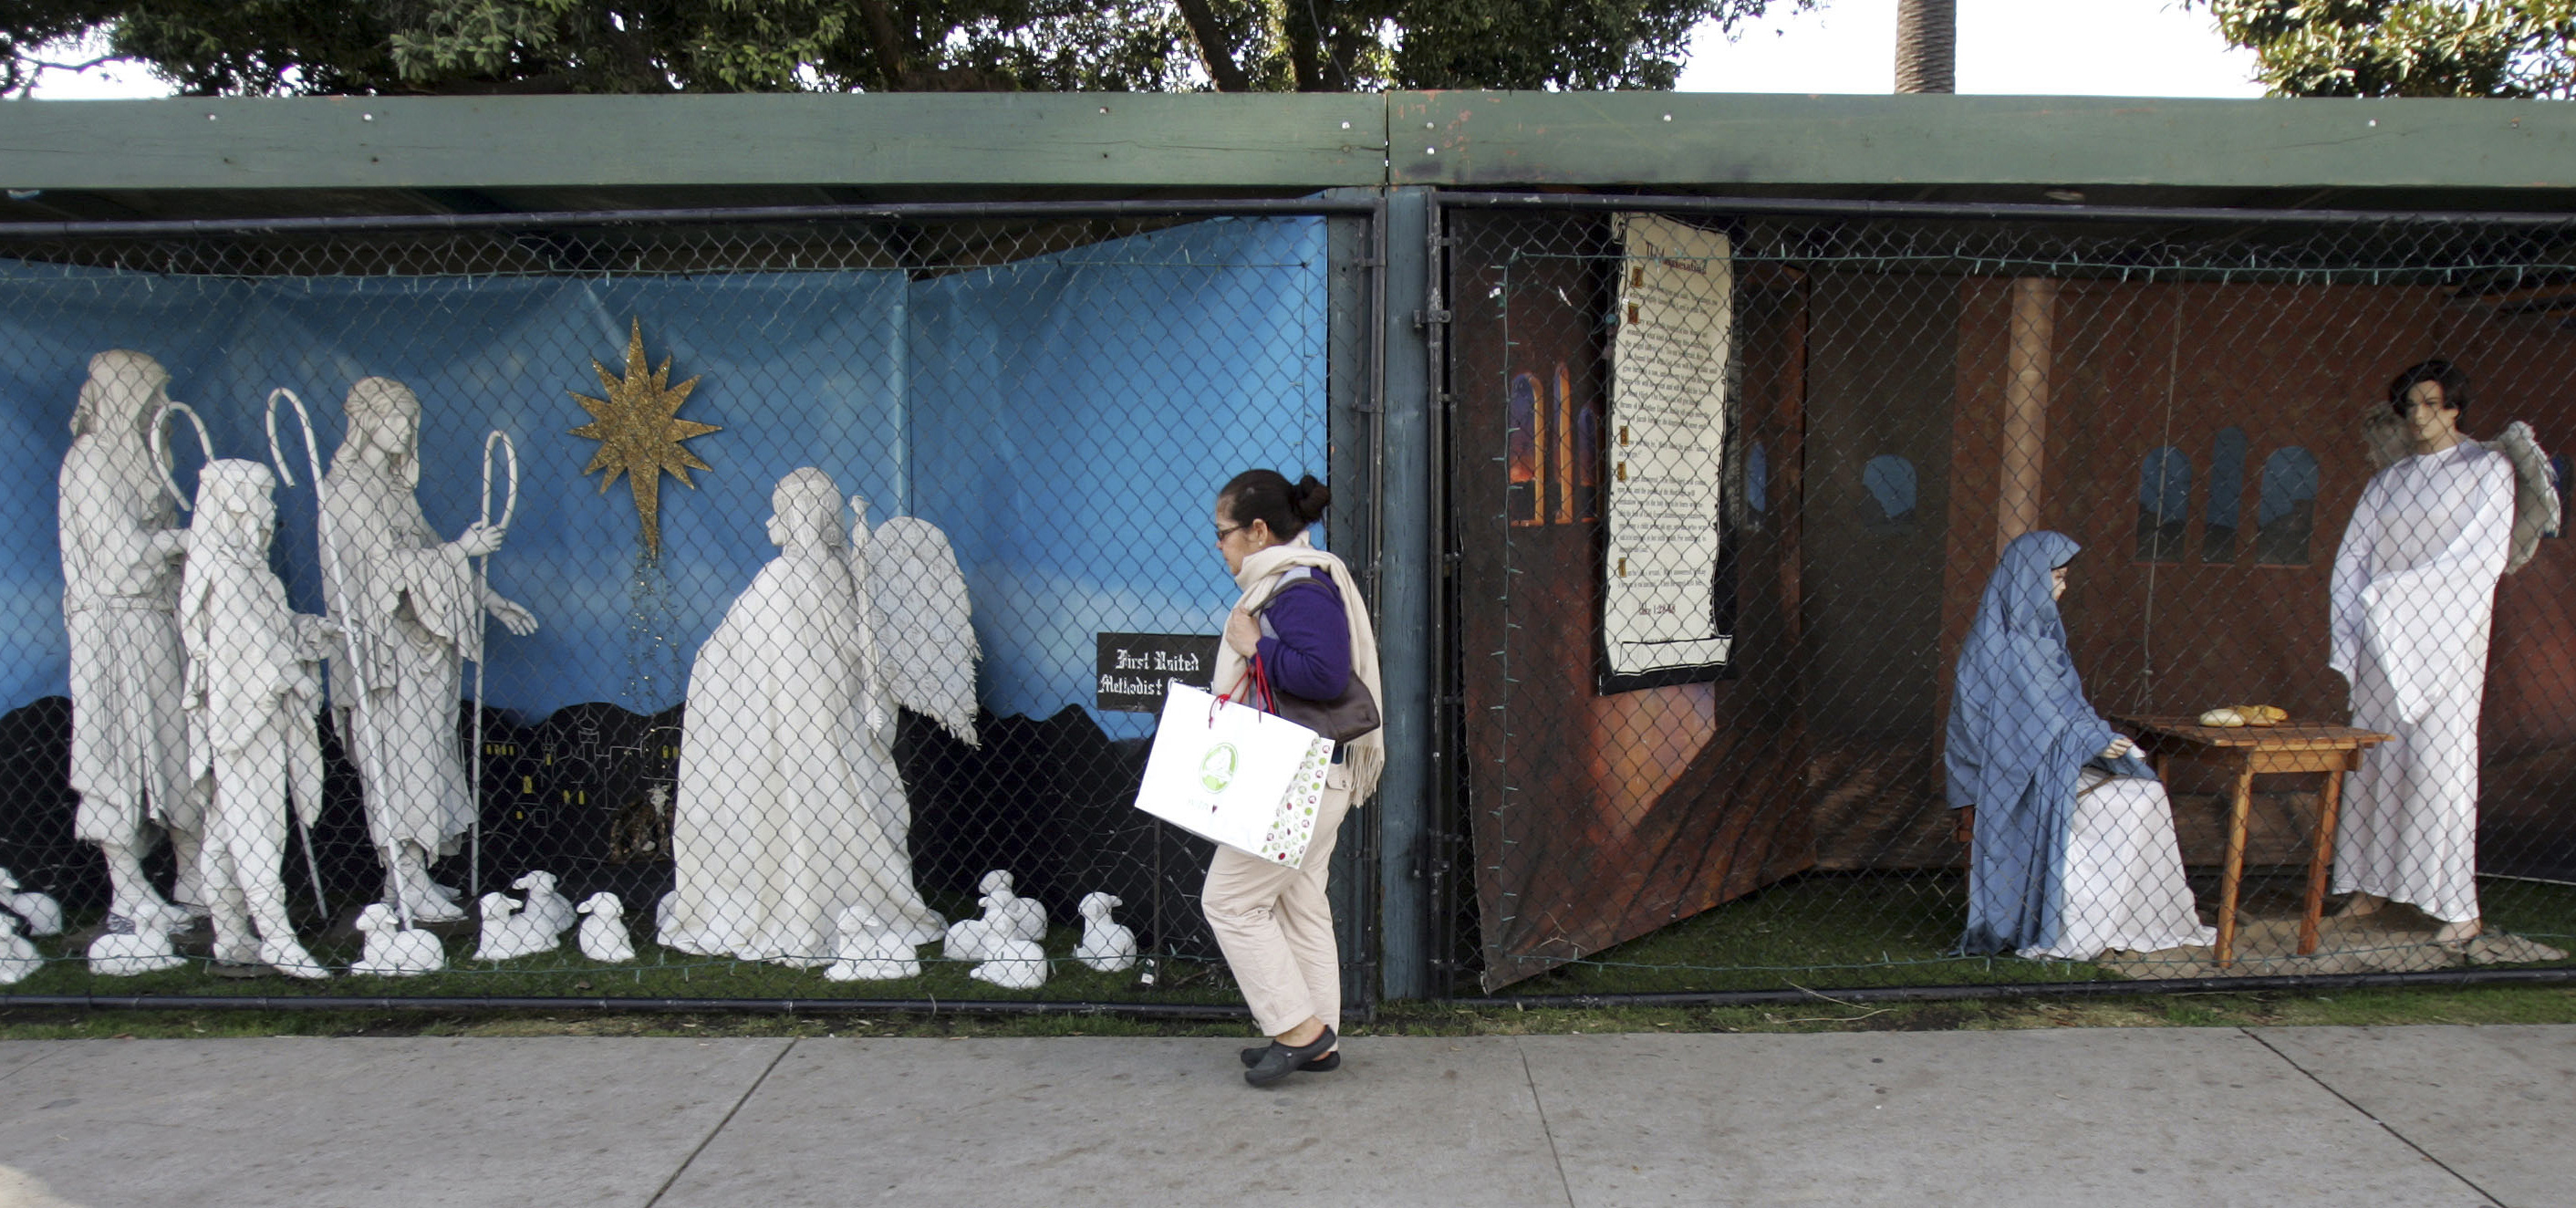 In this Dec. 13, 2011 file photo, a woman walks past a two of the traditional displays showing the Nativity scene along Ocean Avenue at Palisades Park in Santa Monica, Calif.